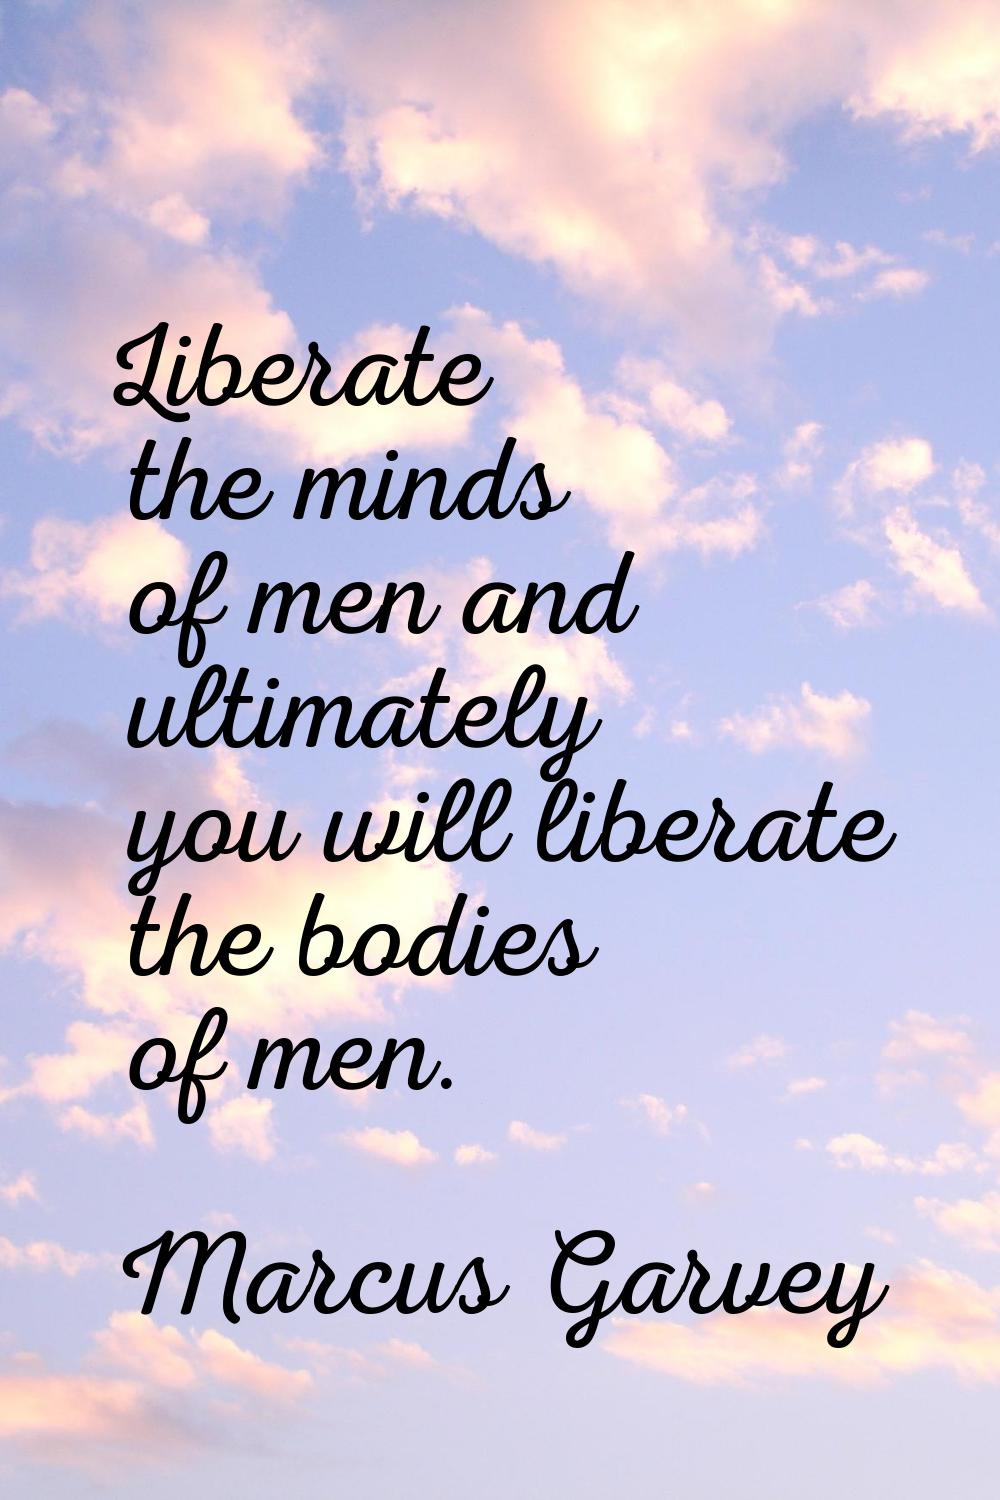 Liberate the minds of men and ultimately you will liberate the bodies of men.